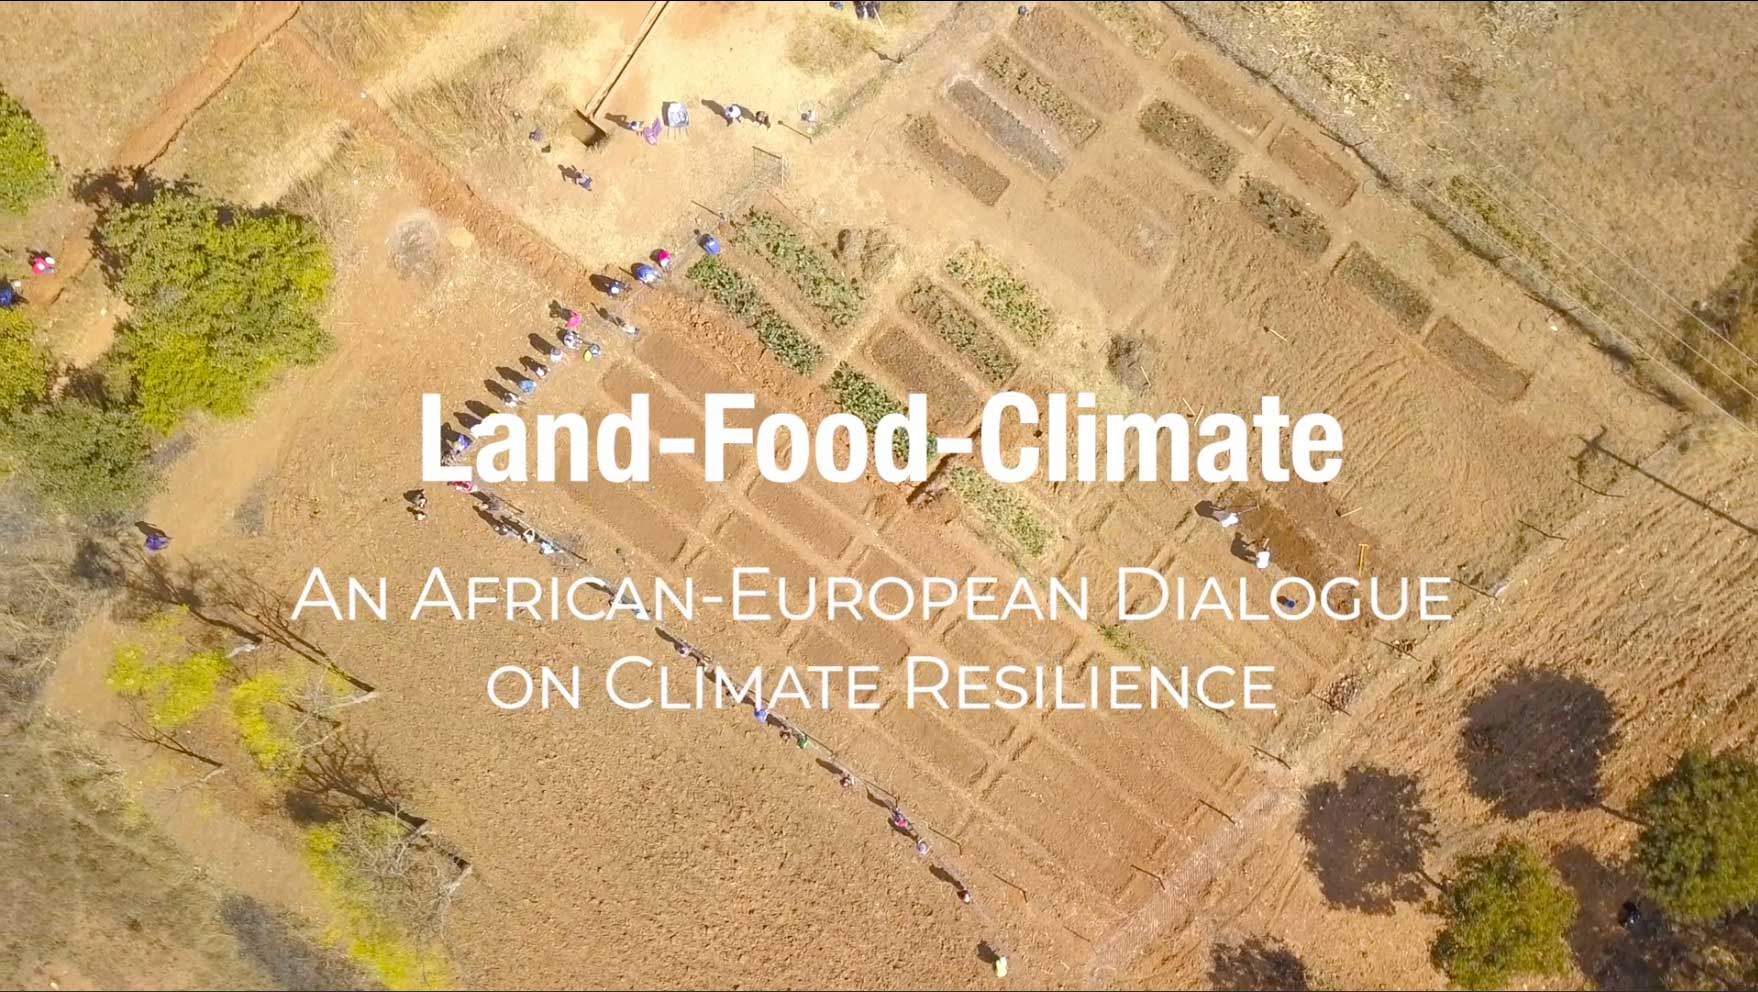 Land-Food-Climate: An African-European Dialogue on Climate Resilience